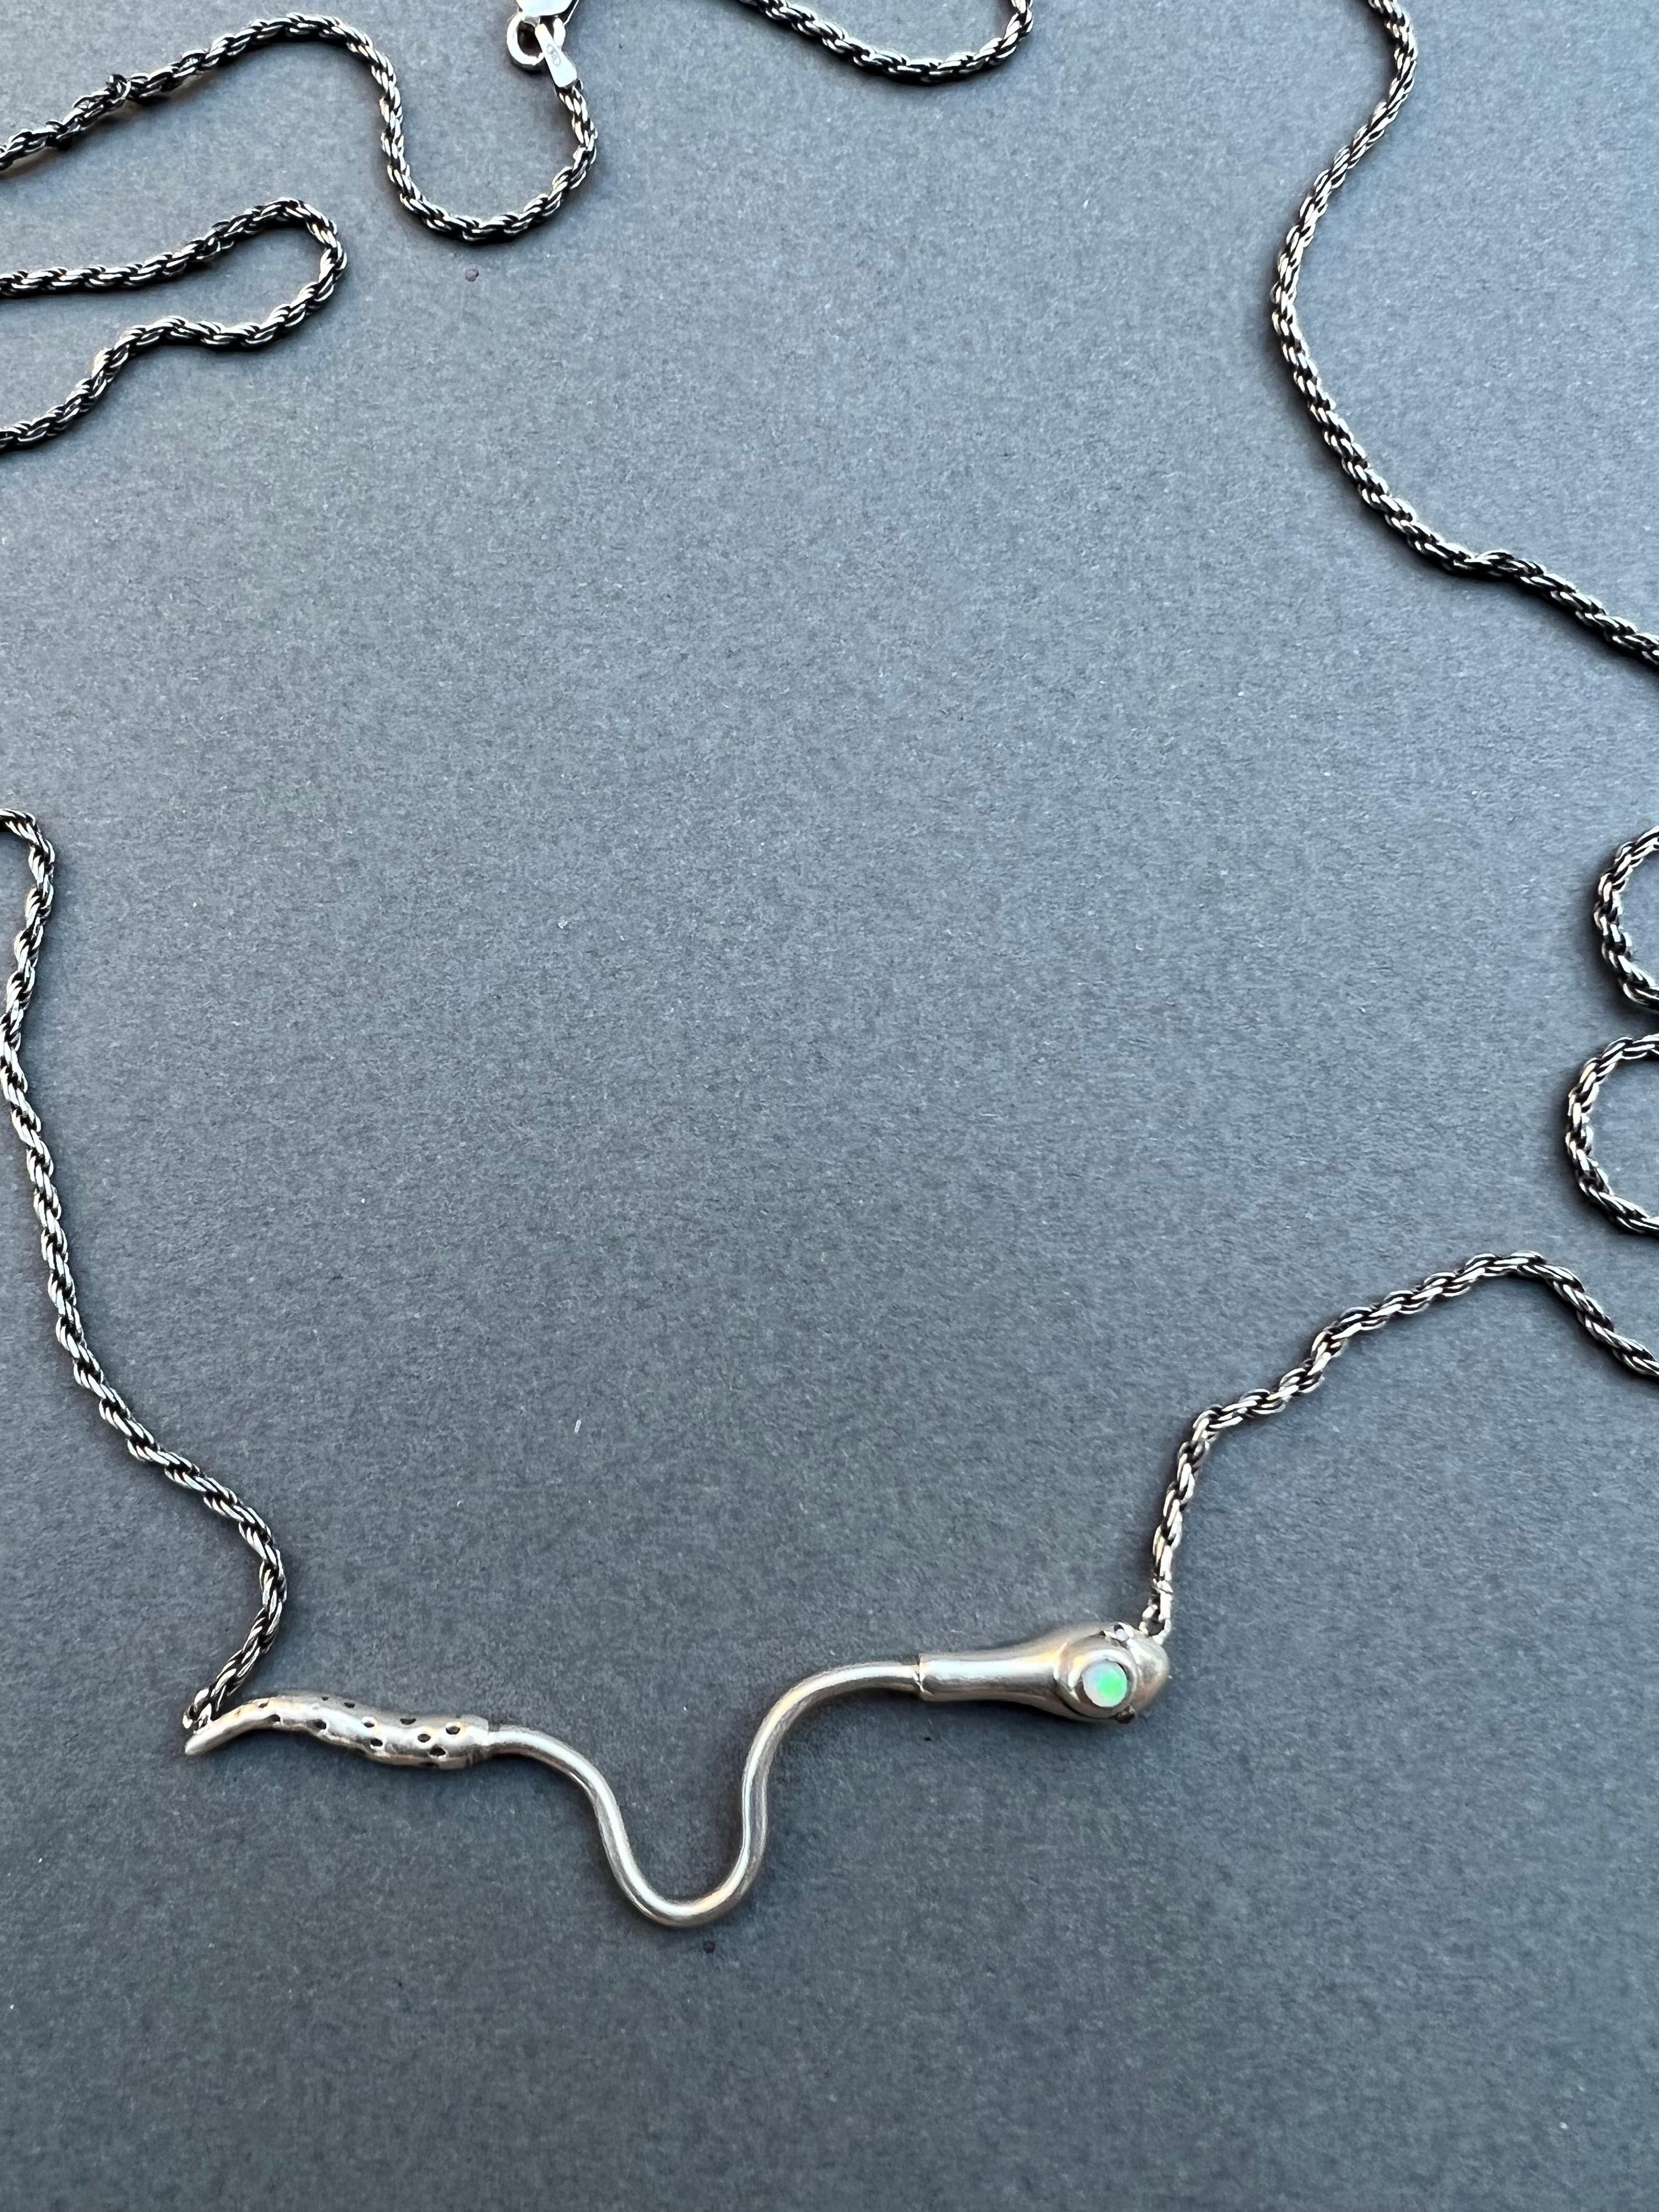 Opal Ruby Snake Necklace Italian Silver Chain J Dauphin For Sale 8